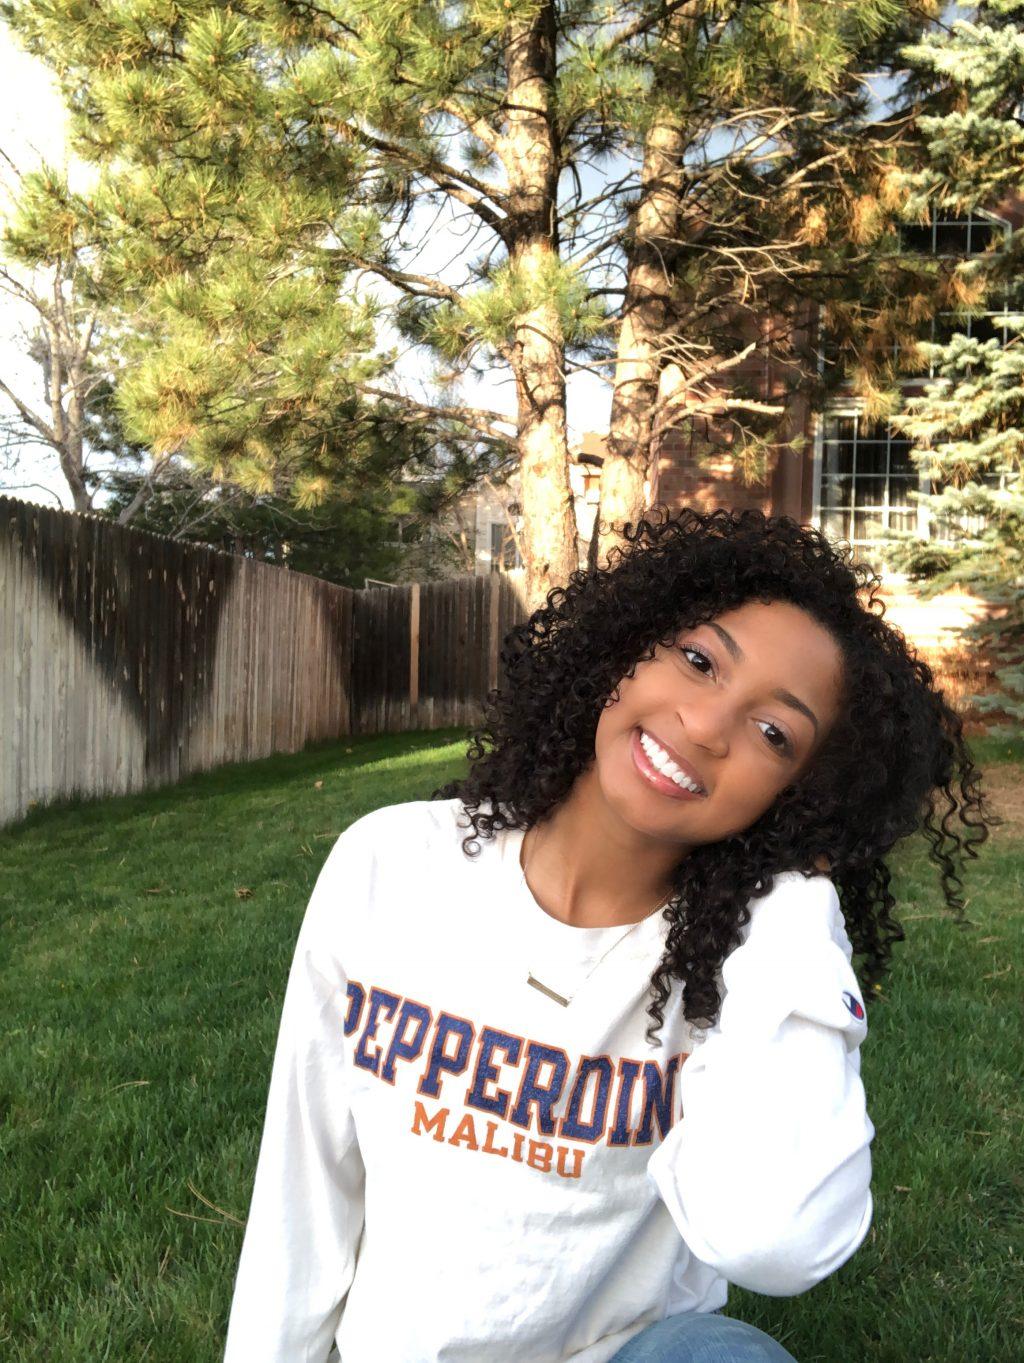 Biology major Pearson smiles, proudly sporting her Pepperdine gear in her backyard. She said she hopes to continue to grow her faith at the University.